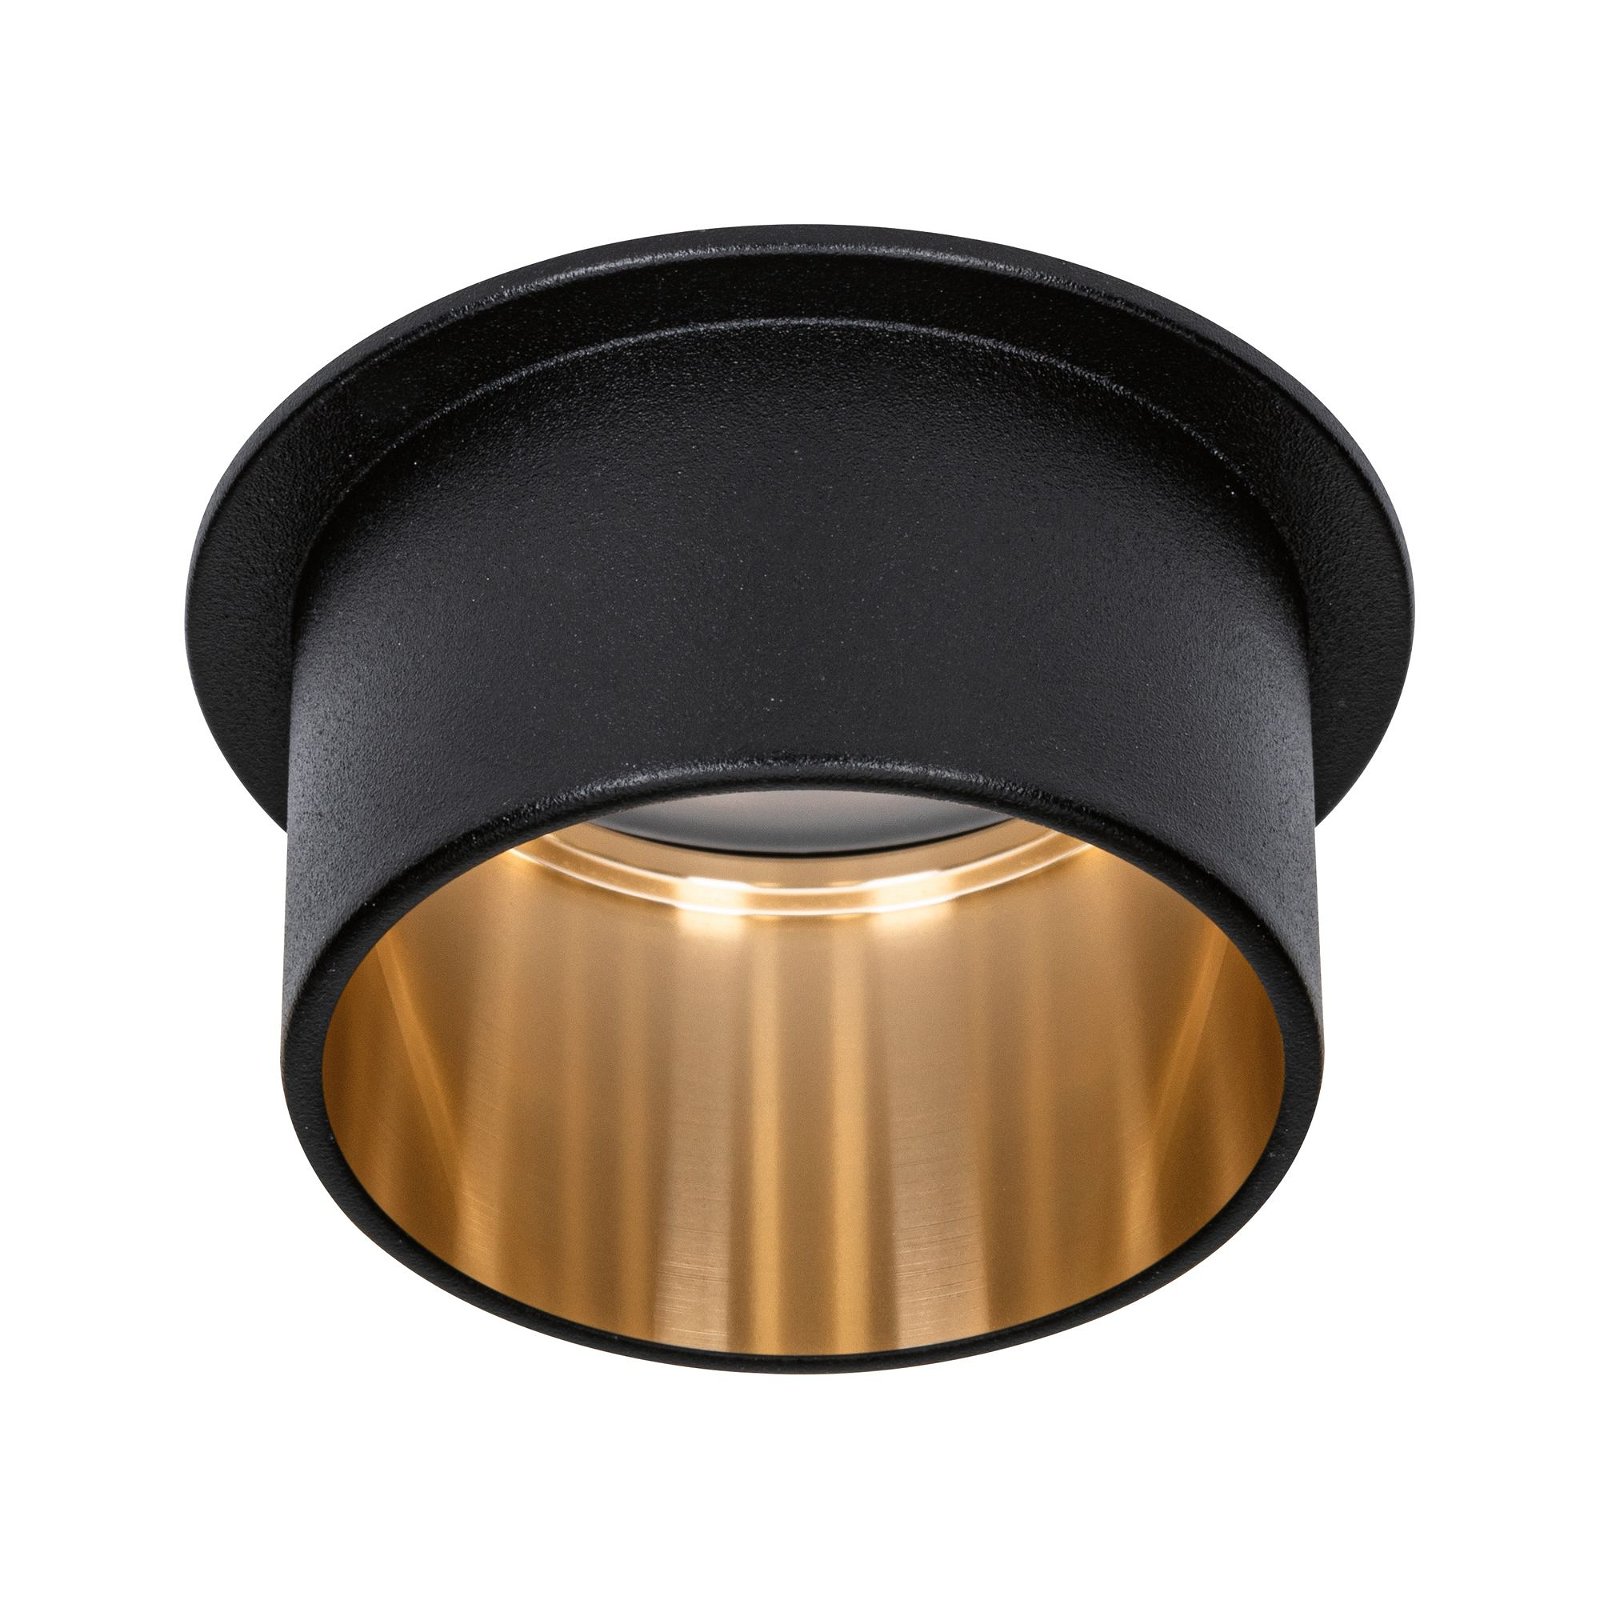 LED Recessed luminaire 3-Step-Dim Gil Coin IP44 round 68mm Coin 6W 470lm 230V dimmable 2700K Black matt/Gold